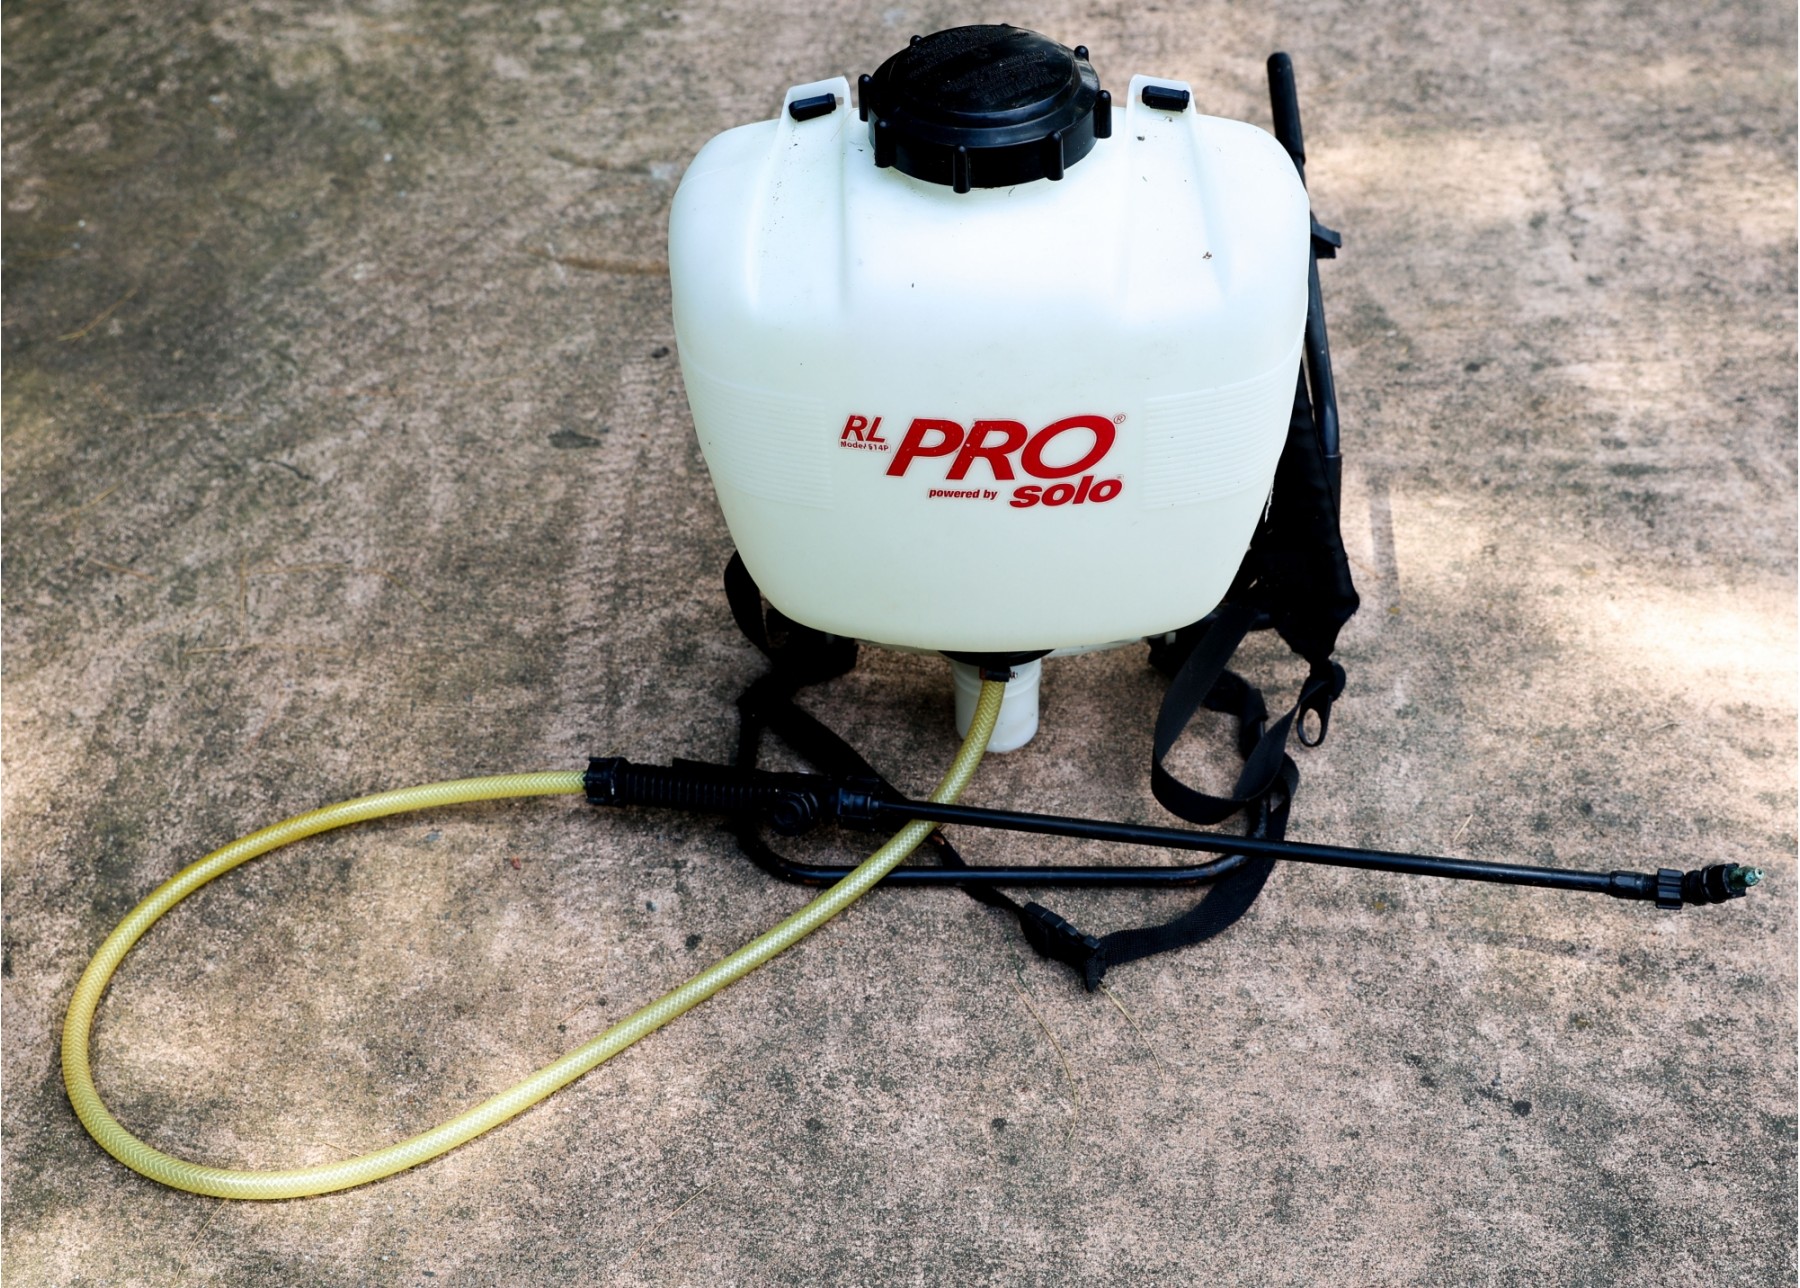 Rl Pro Model 614p Powered By Solo Backpack Sprayer 4 Gal Tank 2744